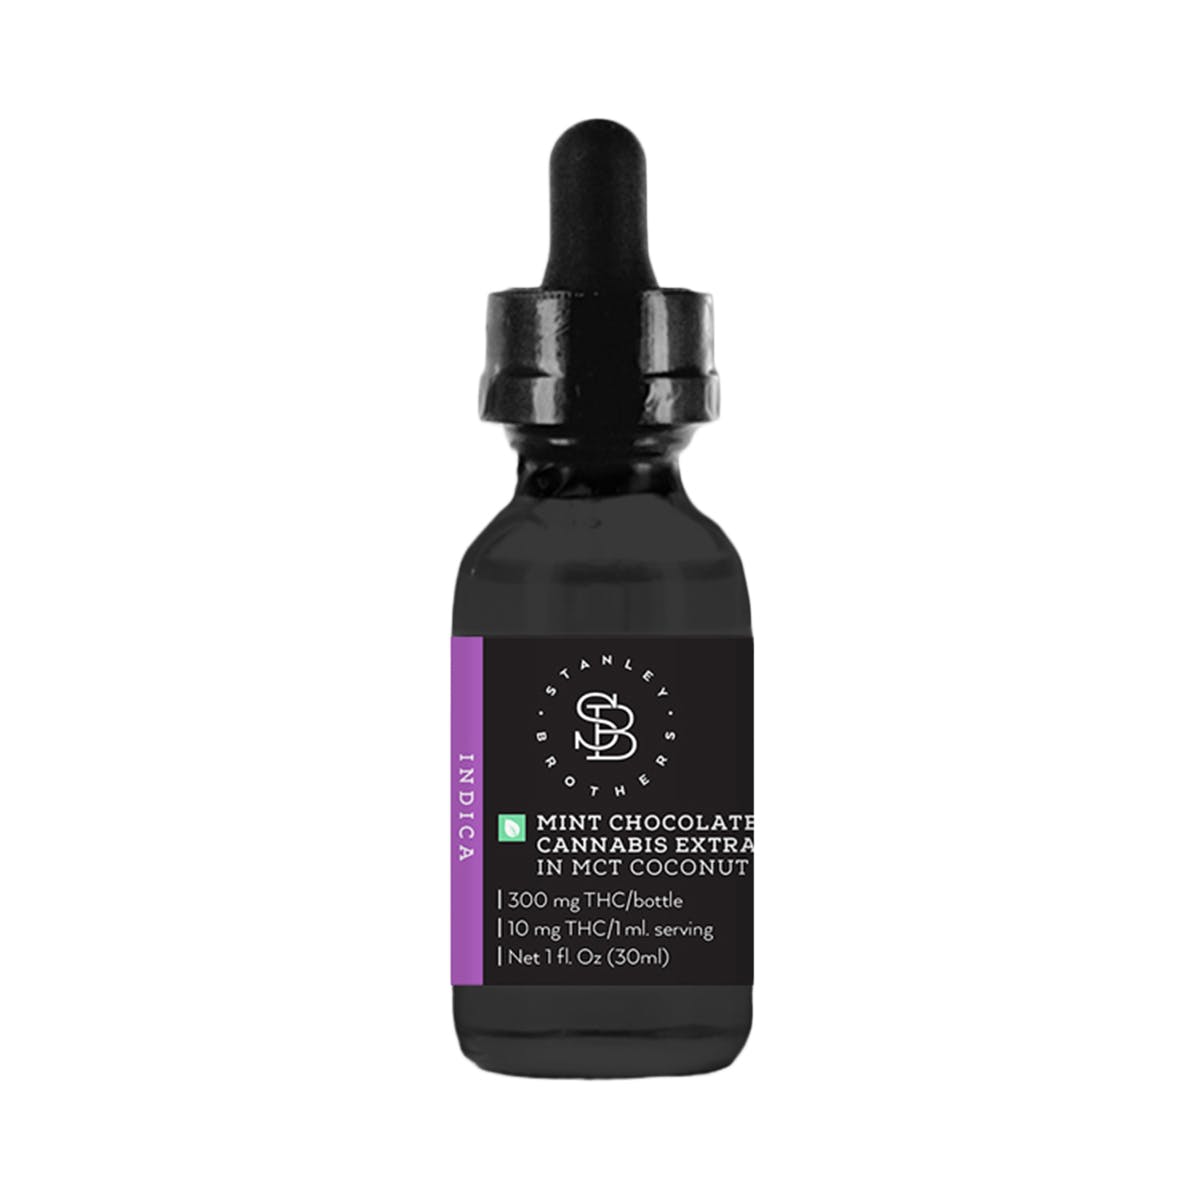 marijuana-dispensaries-livwell-fort-collins-med-in-fort-collins-sb-tincture-mint-chocolate-indica-300mg-thc-med